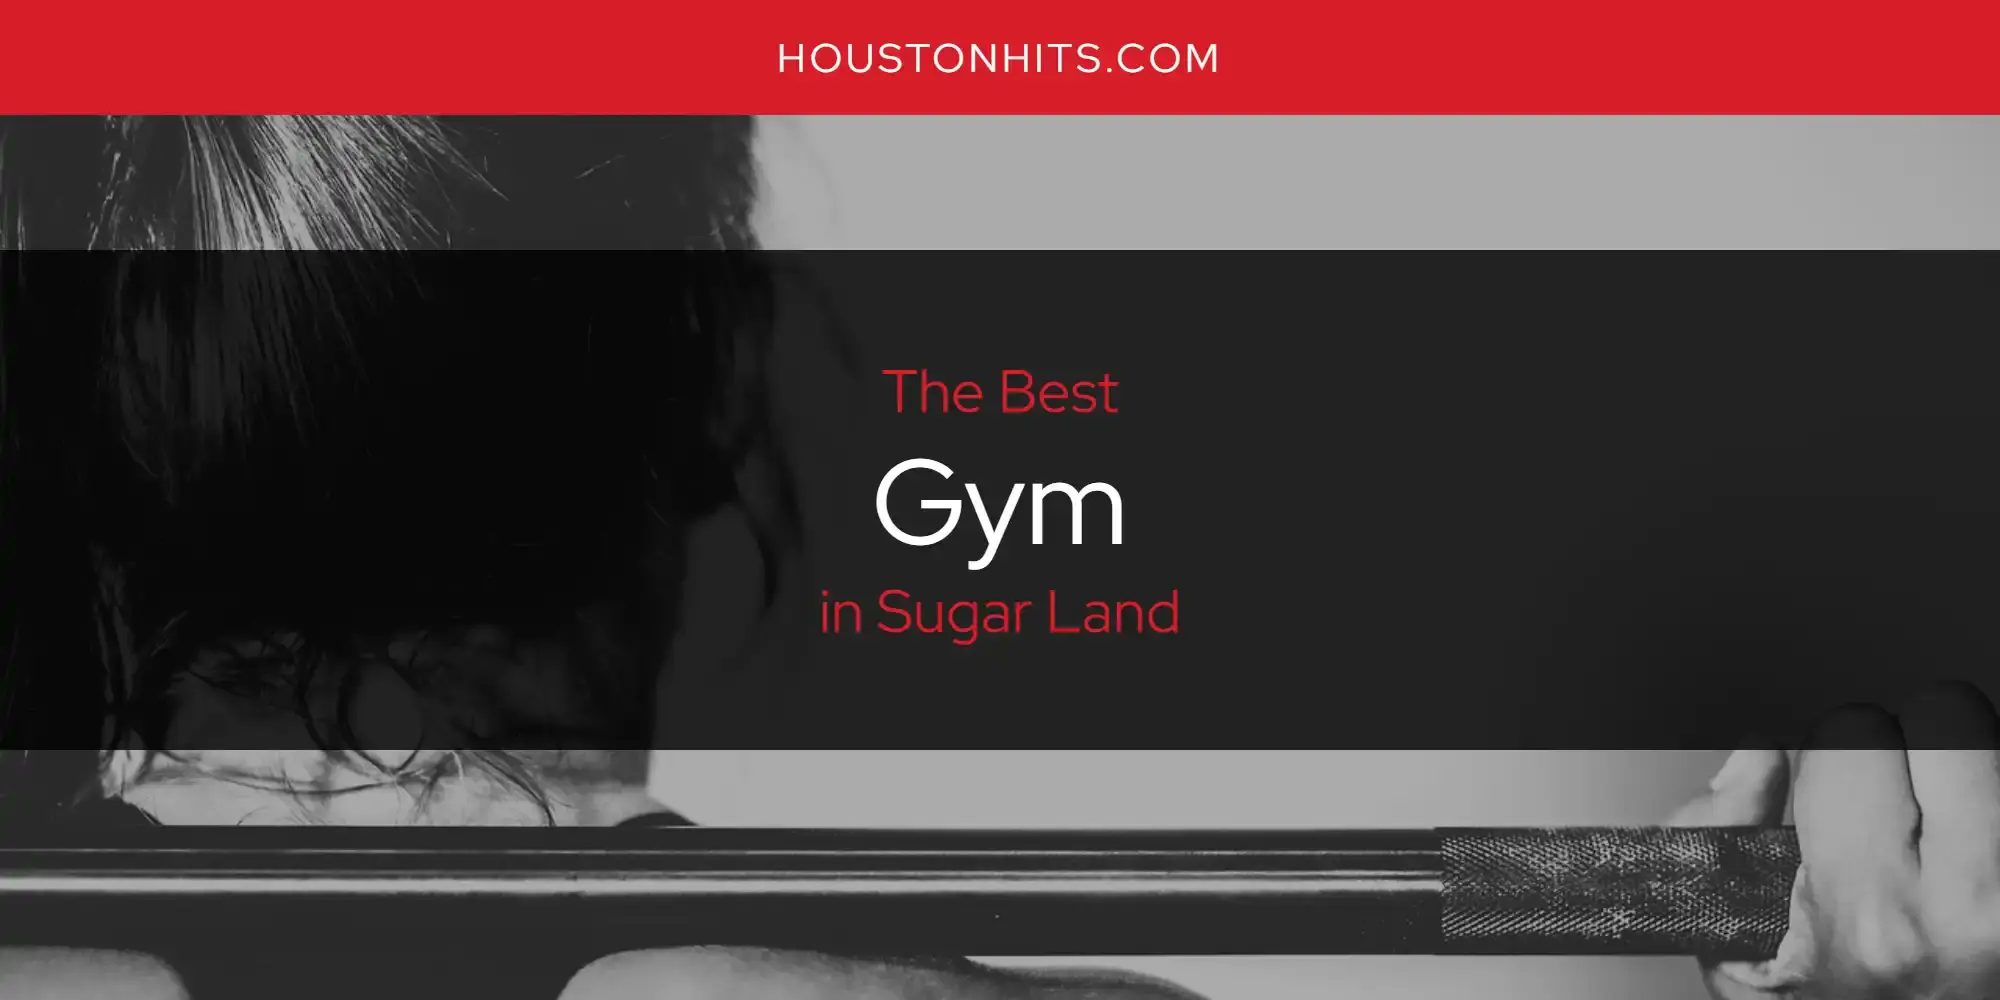 Best Gym in Sugar Land? Here's the Top 17